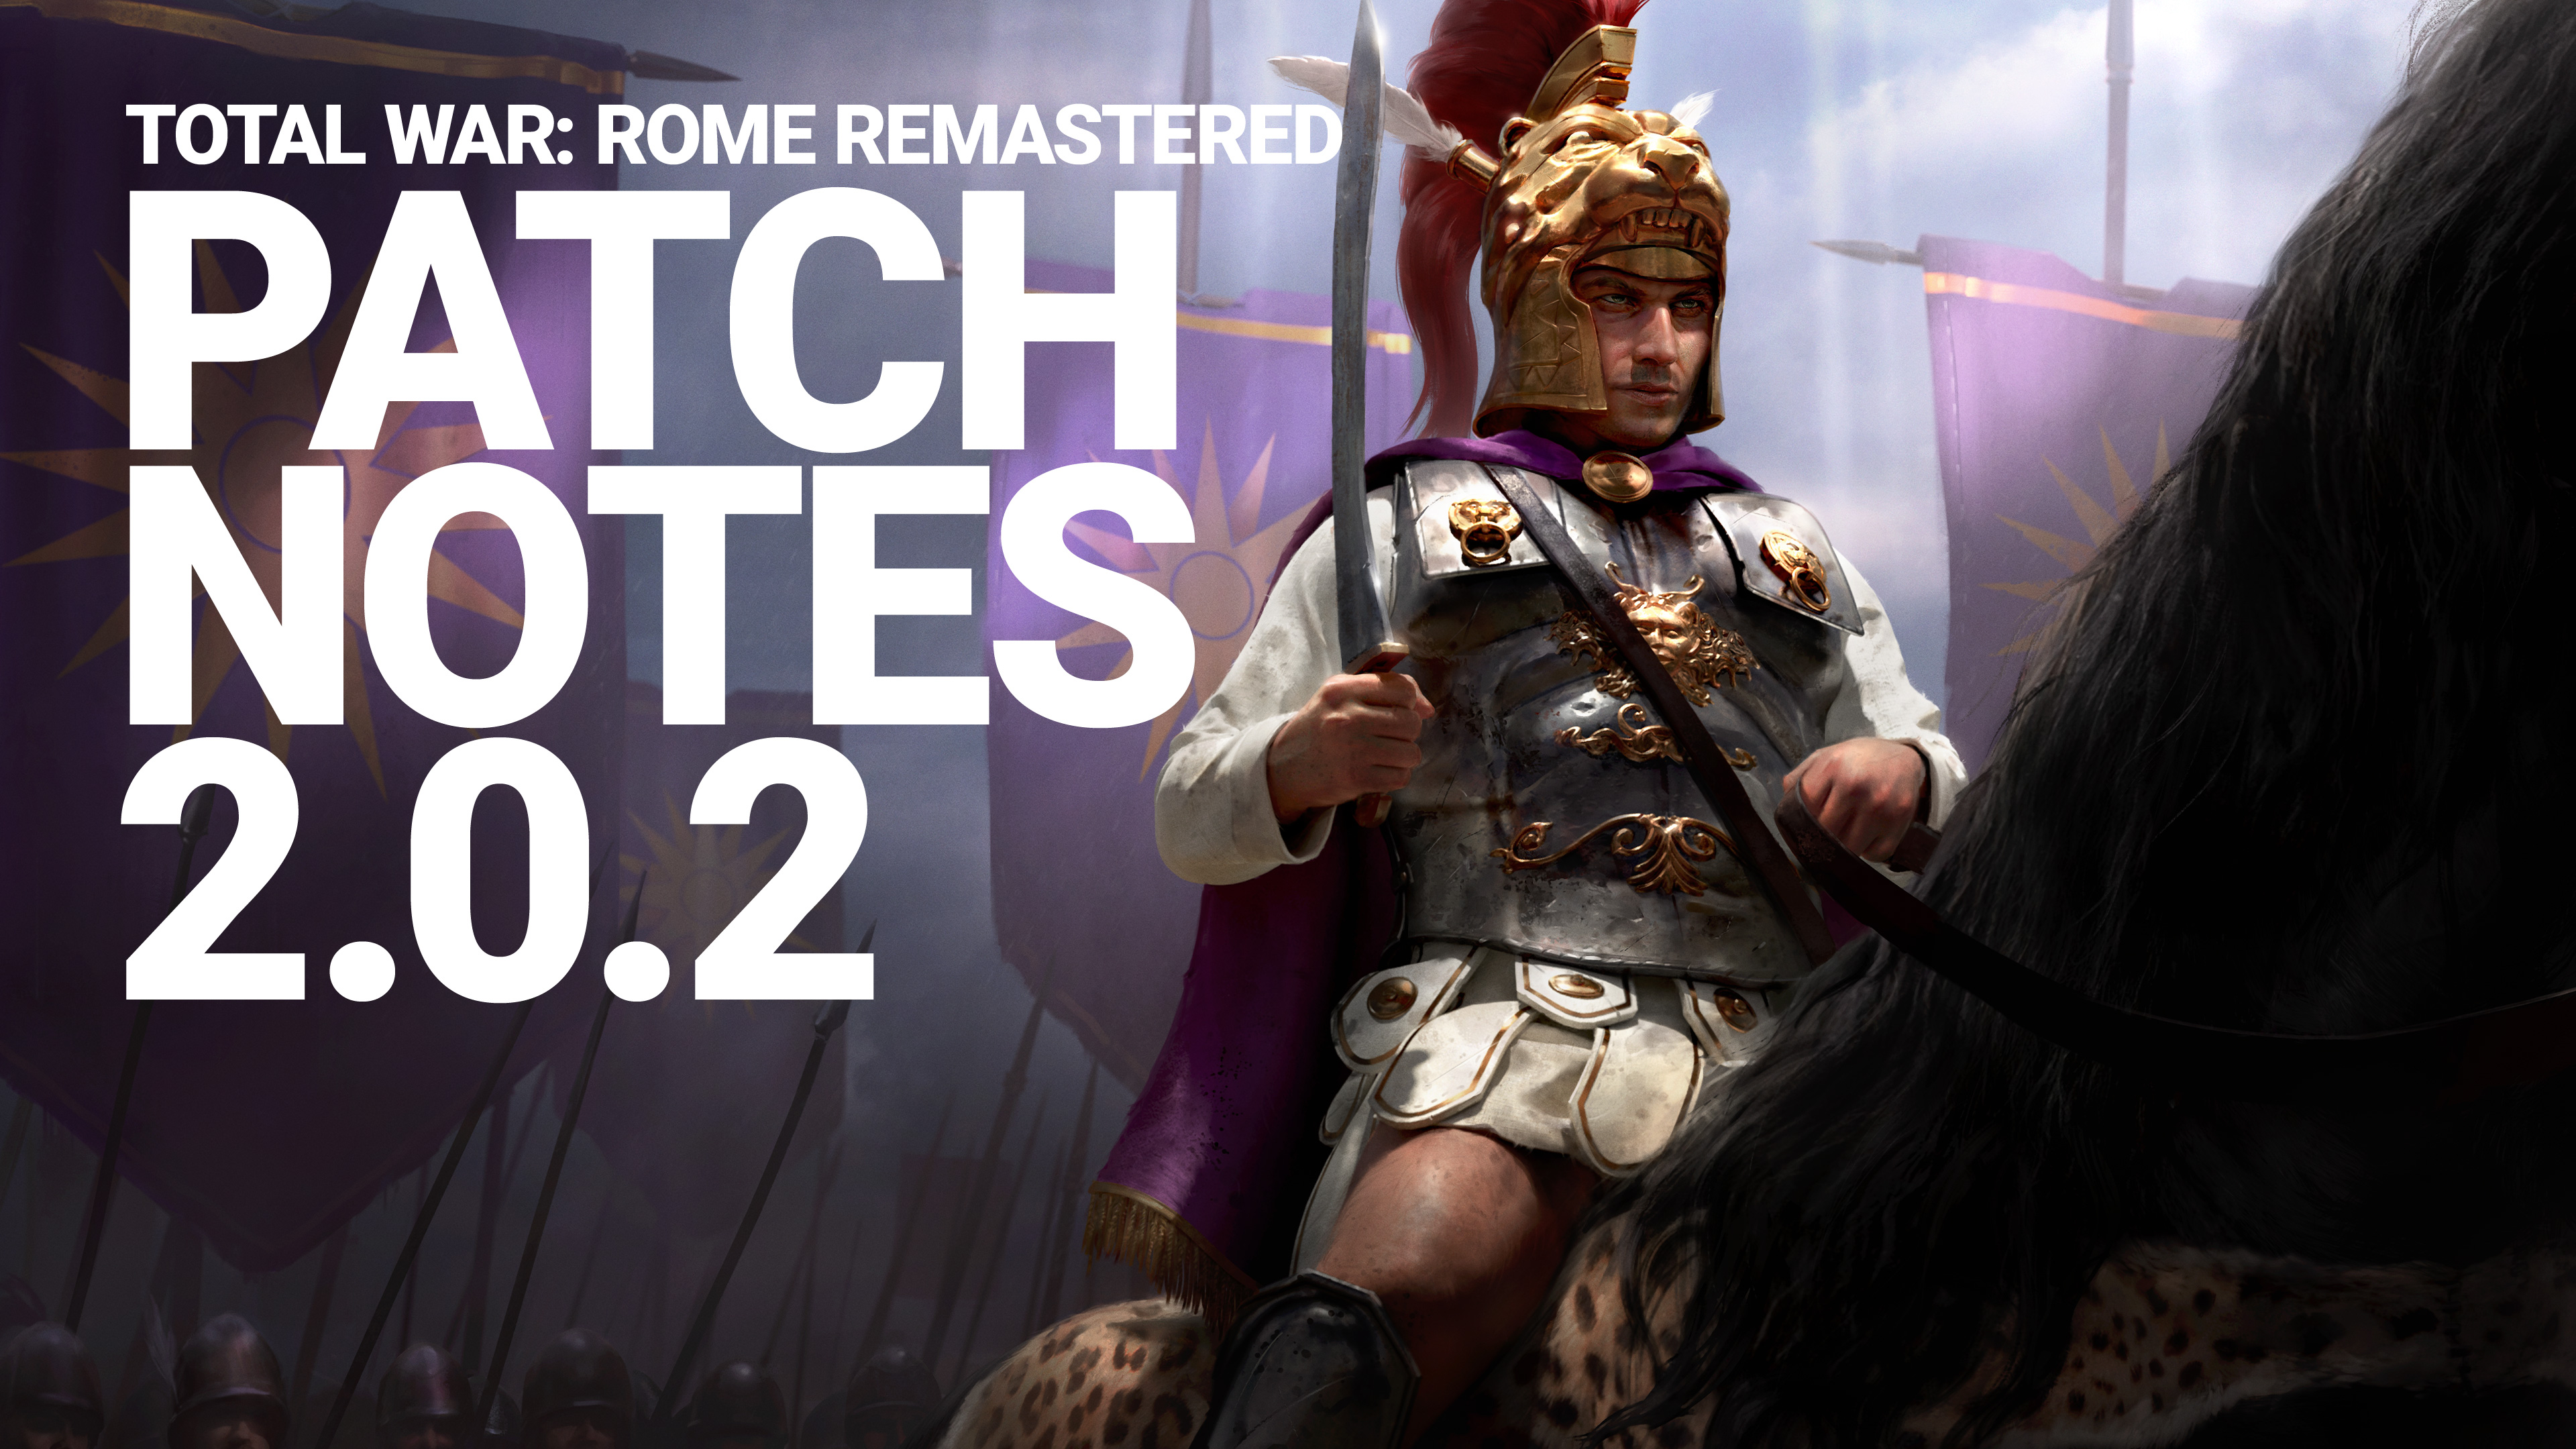 total war rome 2 crashes on startup